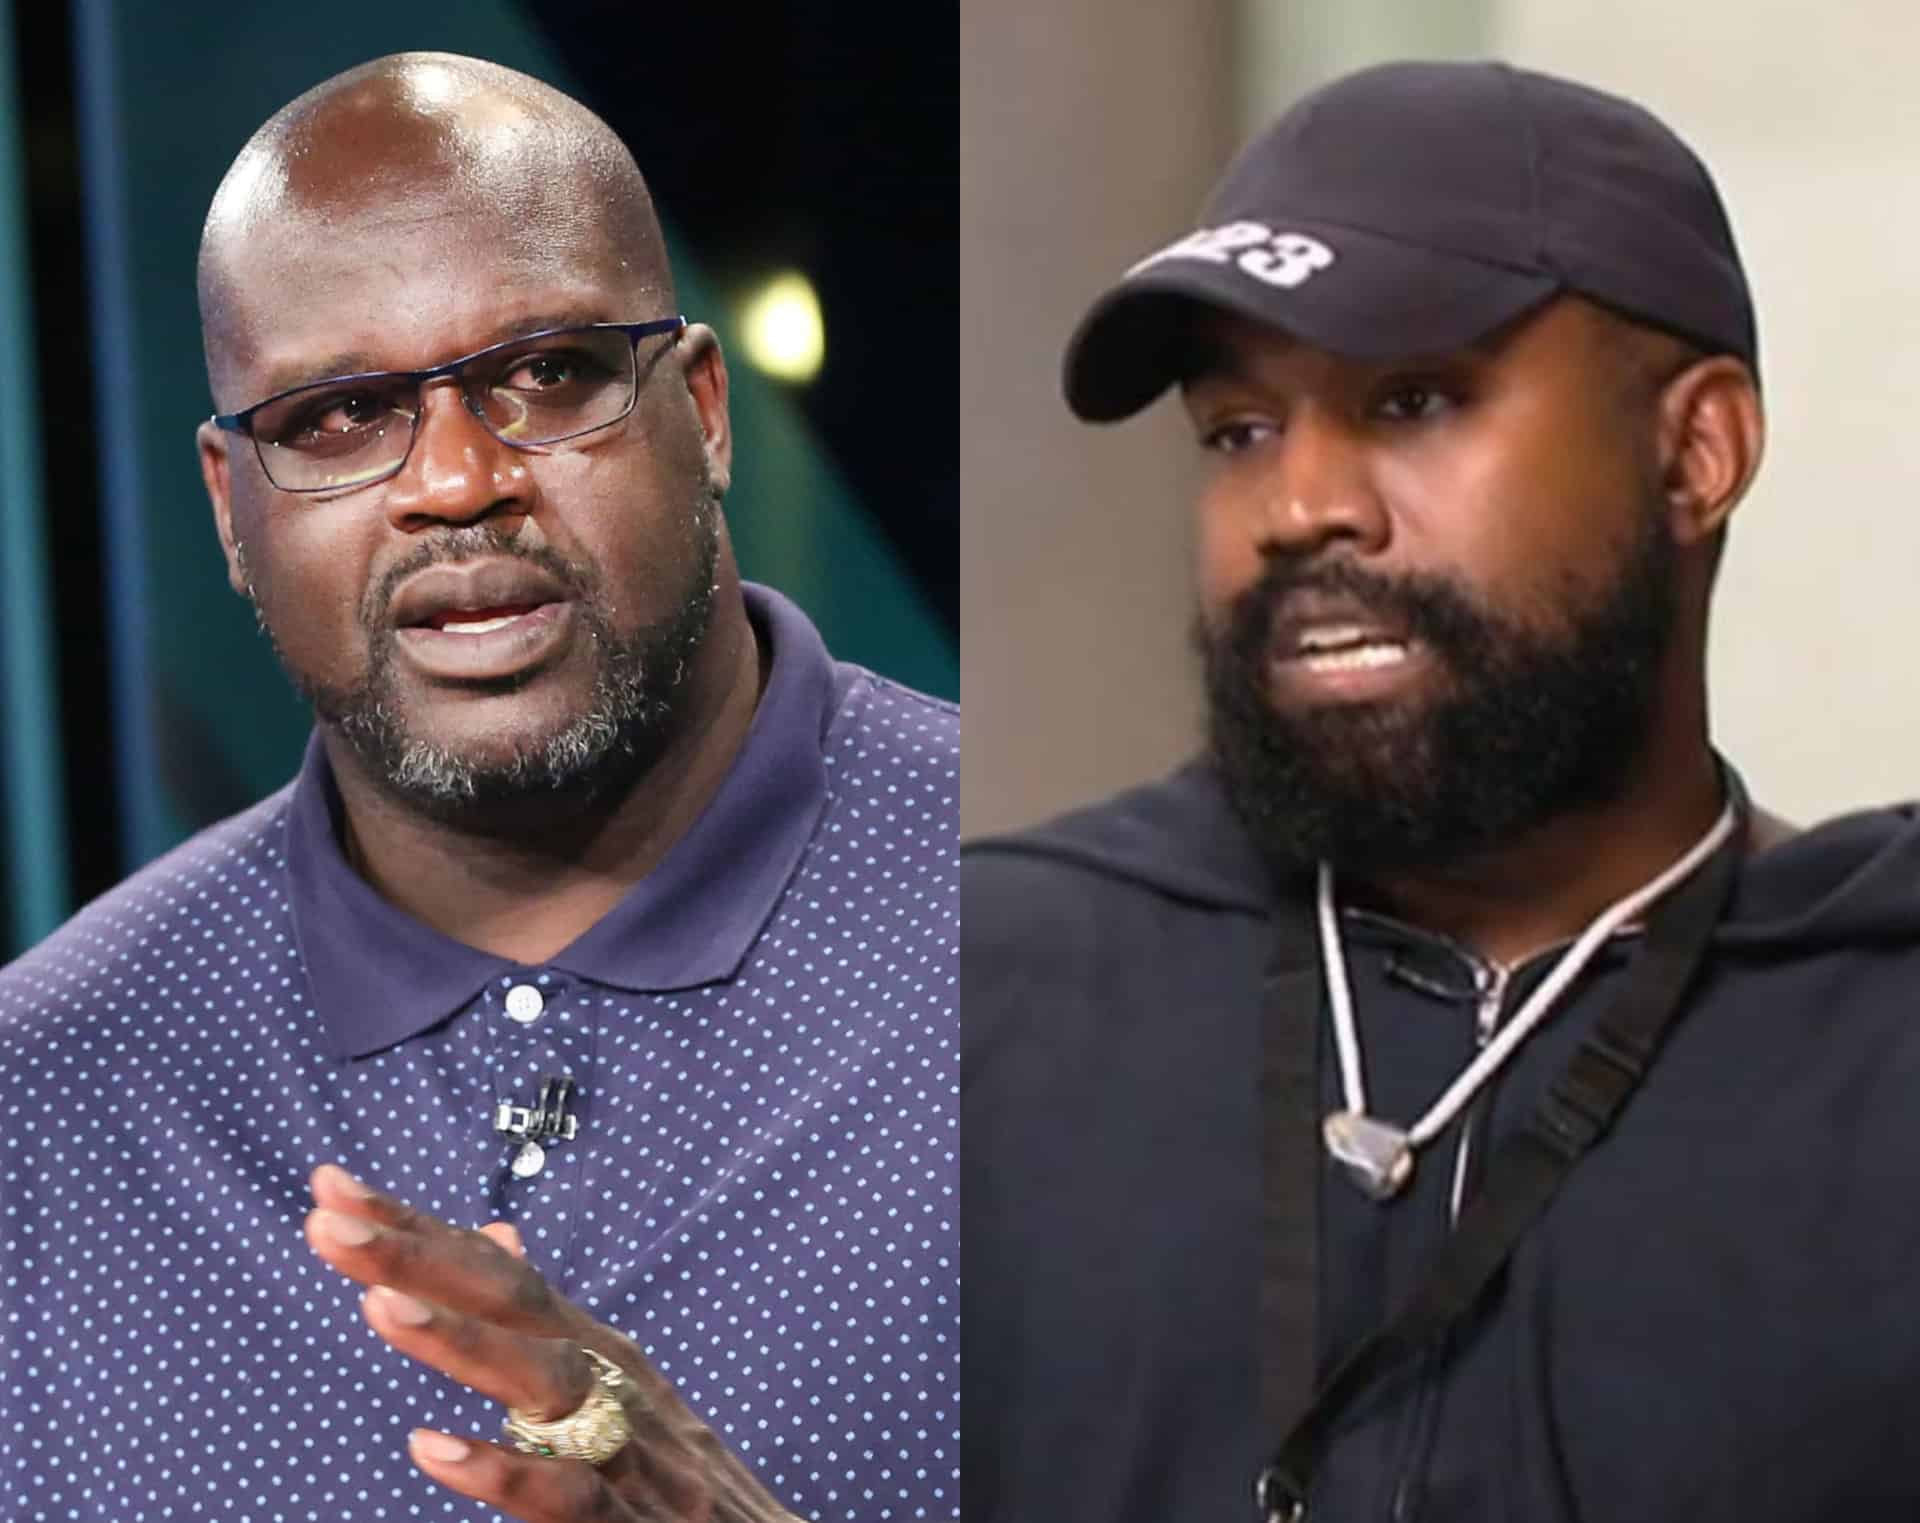 Shaquille O'Neal Fires Shots At Kanye West Stop Bihin And Snitchin